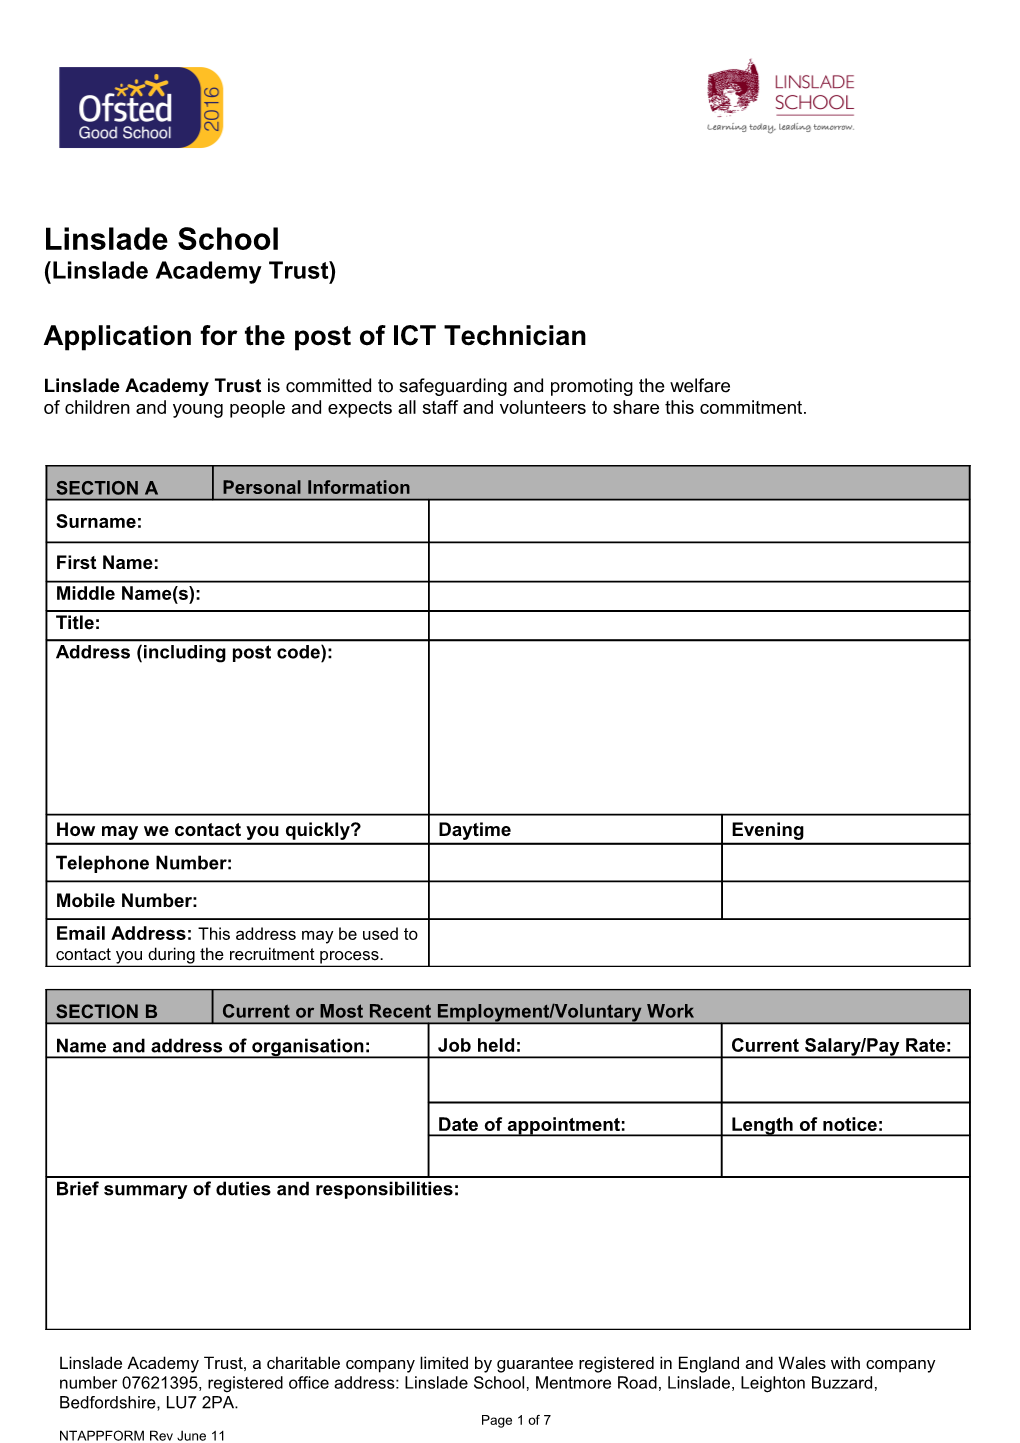 Application for the Post of ICT Technician